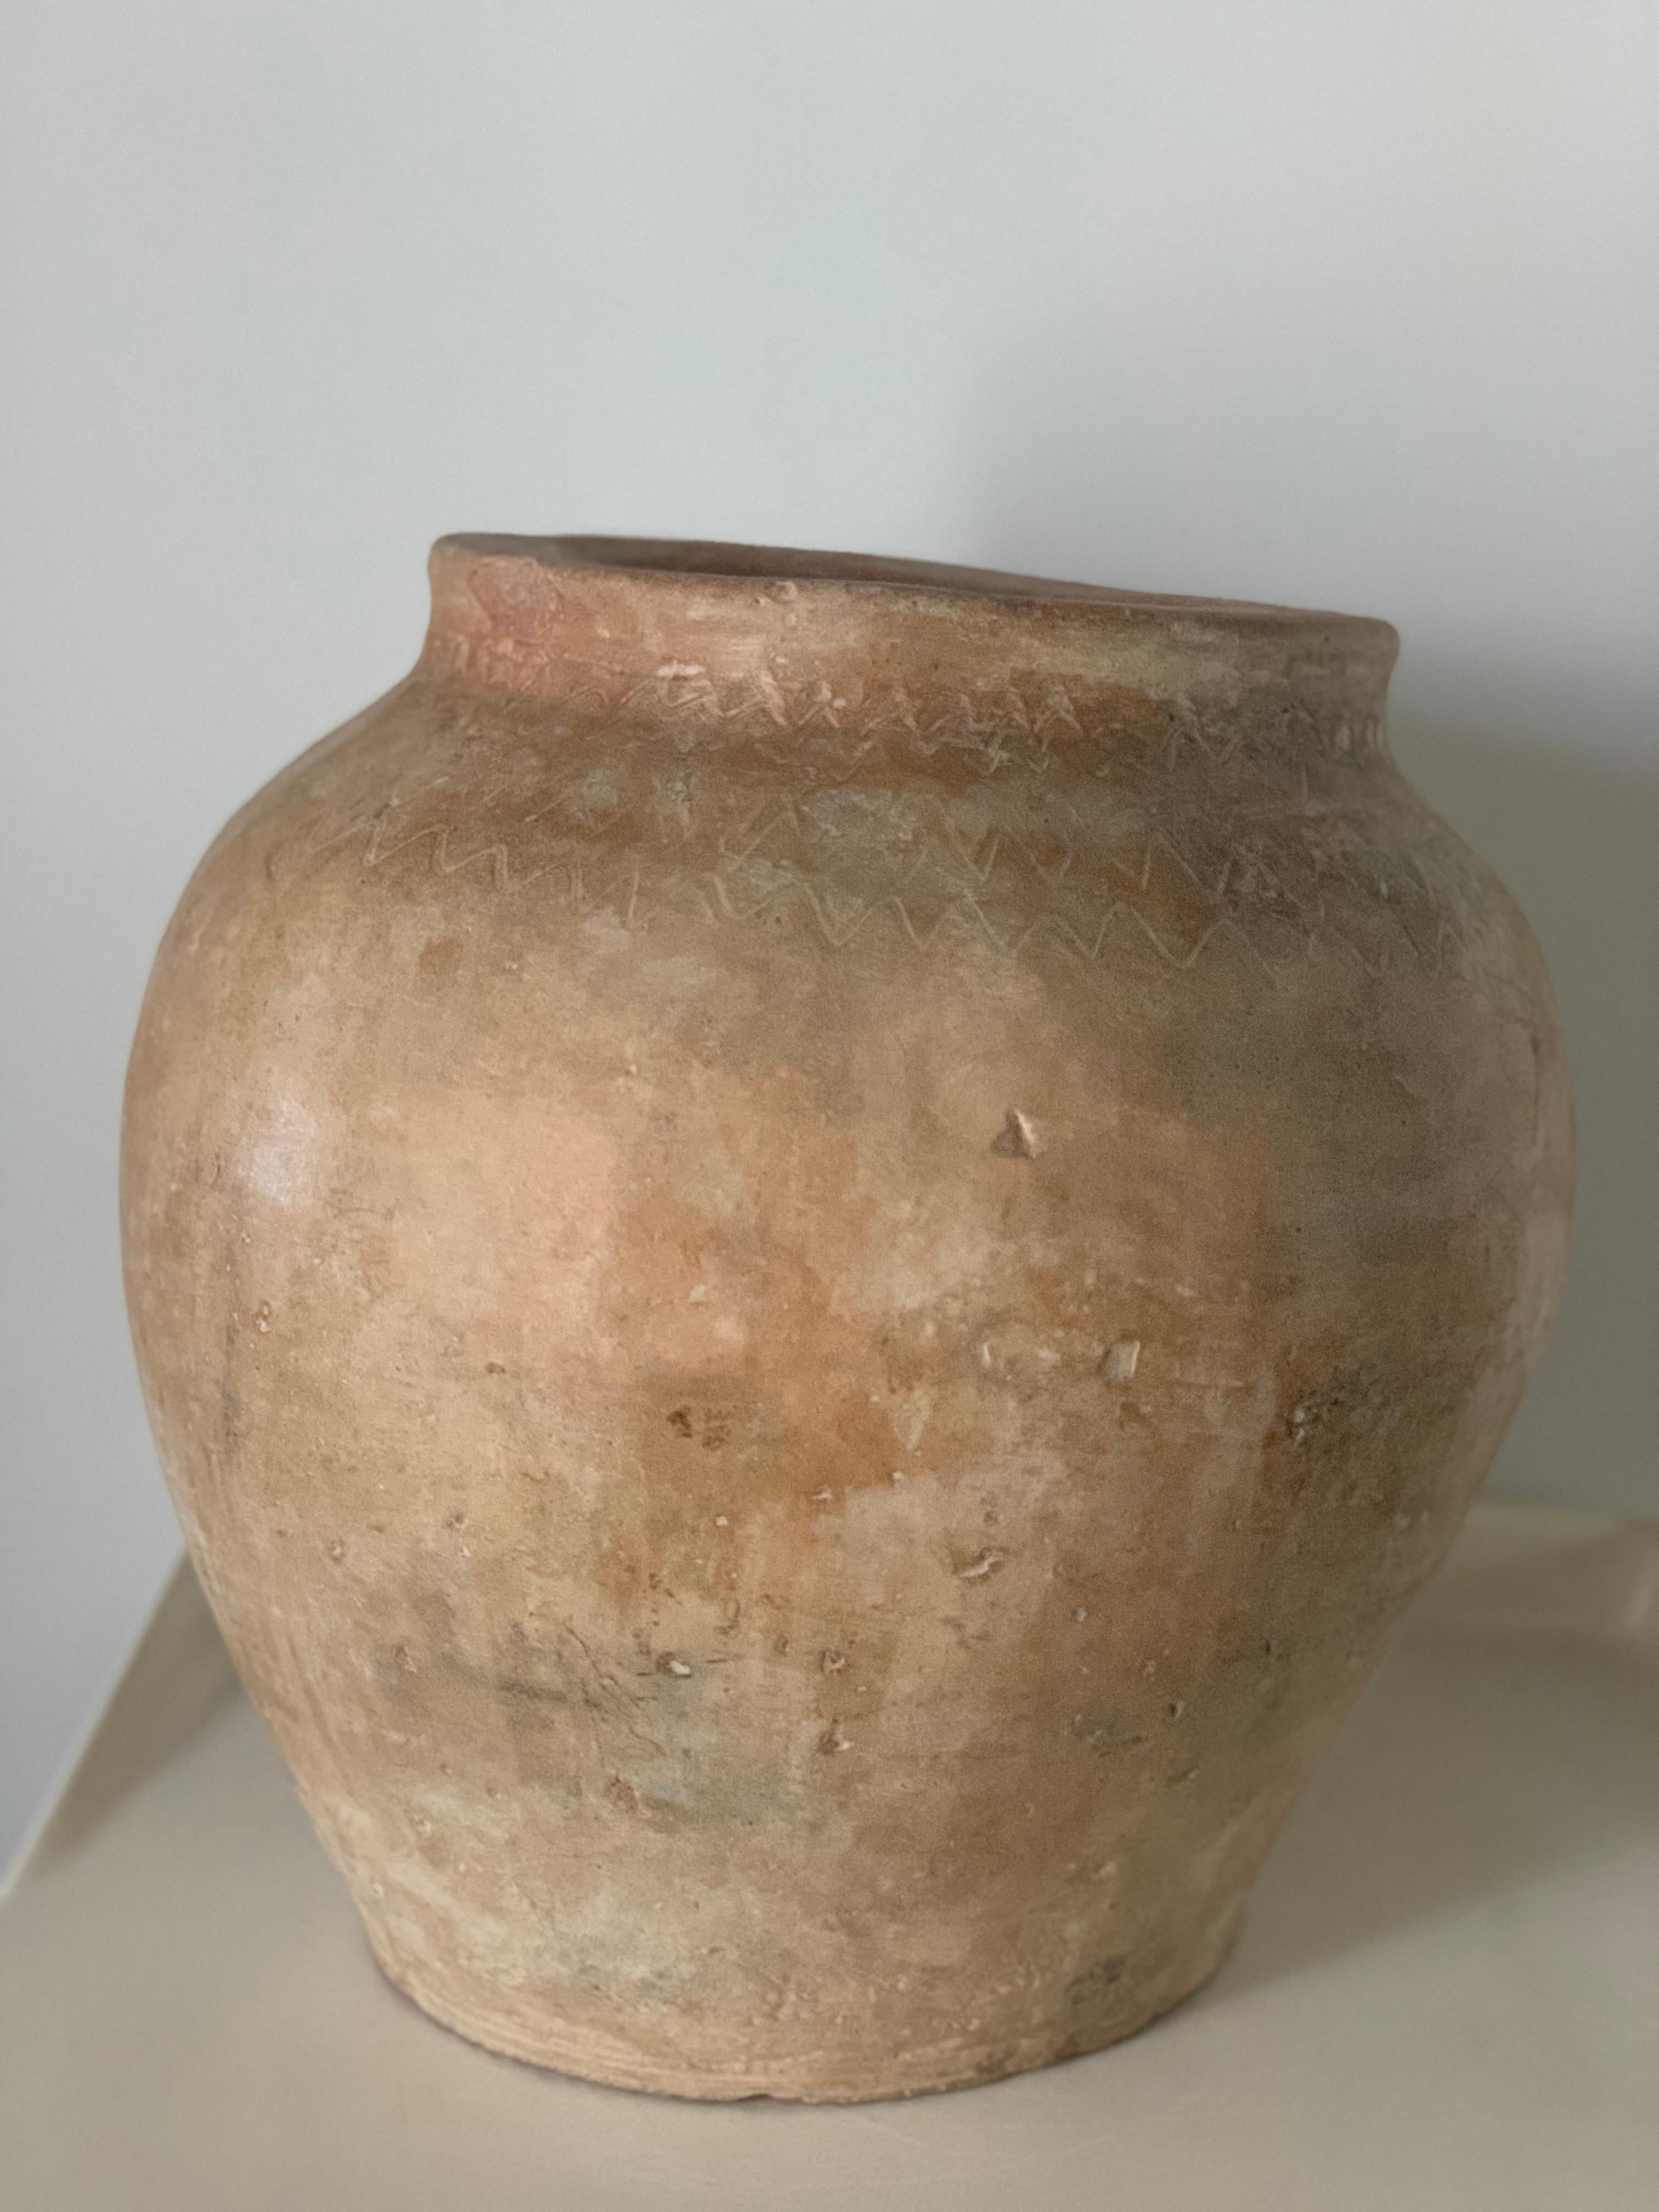 This fabulous handmade terracotta pot originated in Teruel, was used to store olive oil. In perfect condition and excellent patina.
These pots make an elegant statement around a pool and are magnificent in a grouping, perhaps by the entrance to